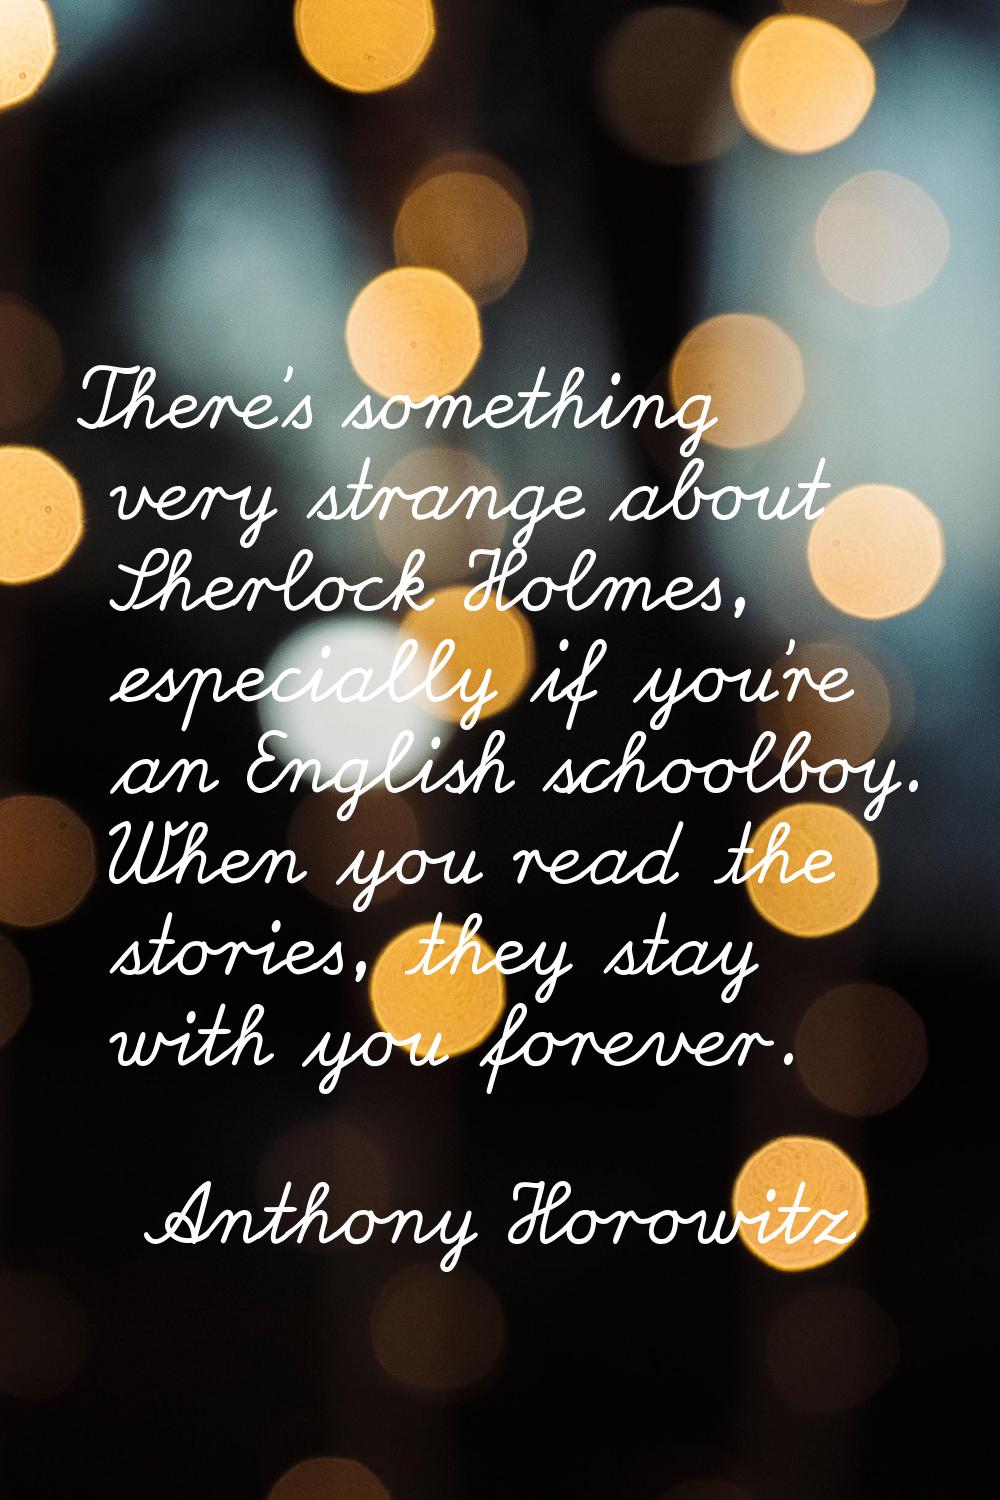 There's something very strange about Sherlock Holmes, especially if you're an English schoolboy. Wh